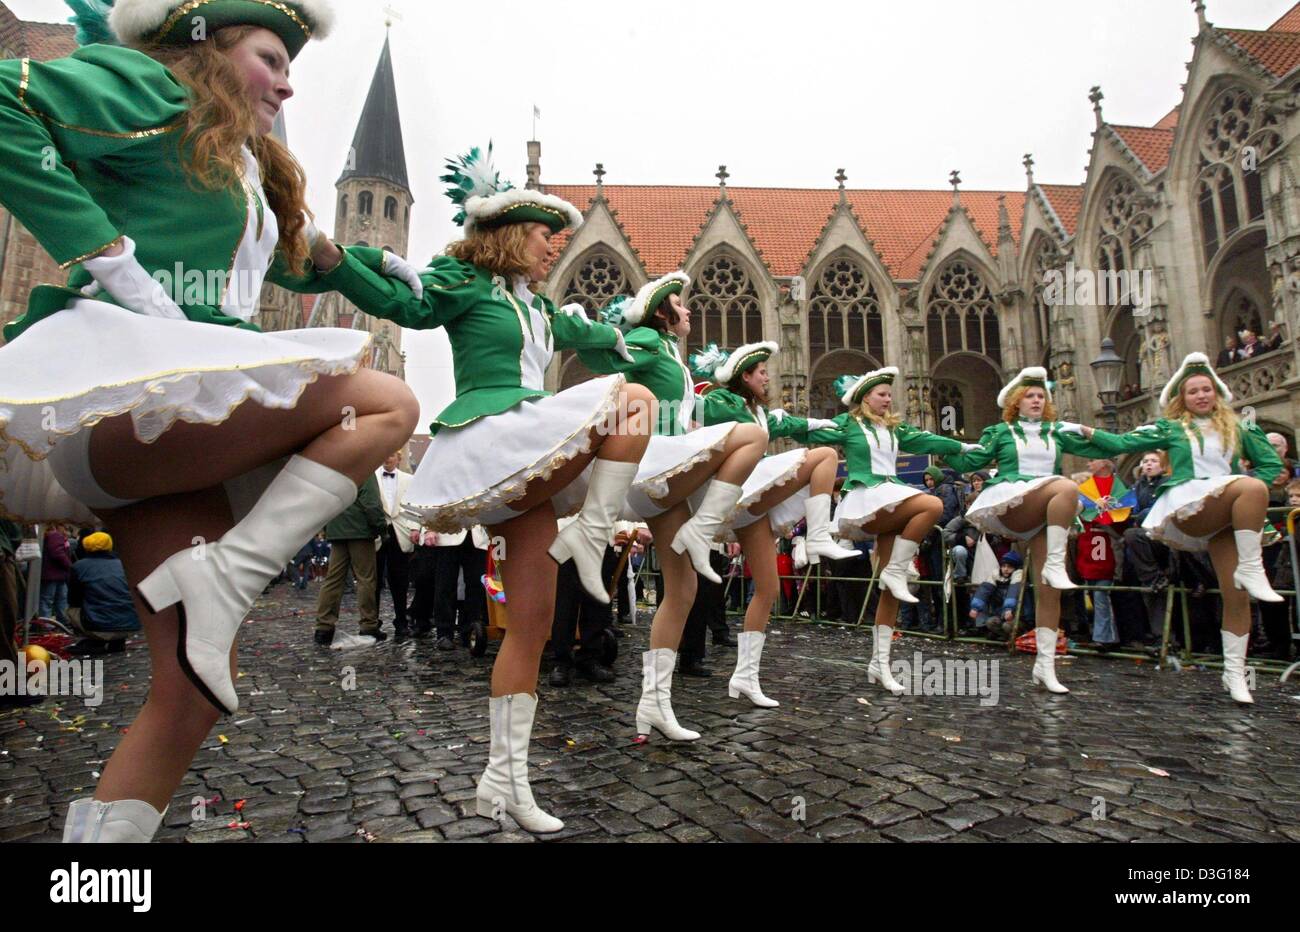 (dpa) - Female guards, dressed in their traditional uniform, dance in front of the old city hall in Braunschweig, Germany, 2 March 2003. The parade in Braunschweig takes place for the 25th time. It is the longest procession of northern Germany and it comprises 220 groups and floats with 4,300 carnival revellers, musicians and dancers. At least 200,000 spectators are expected. Stock Photo